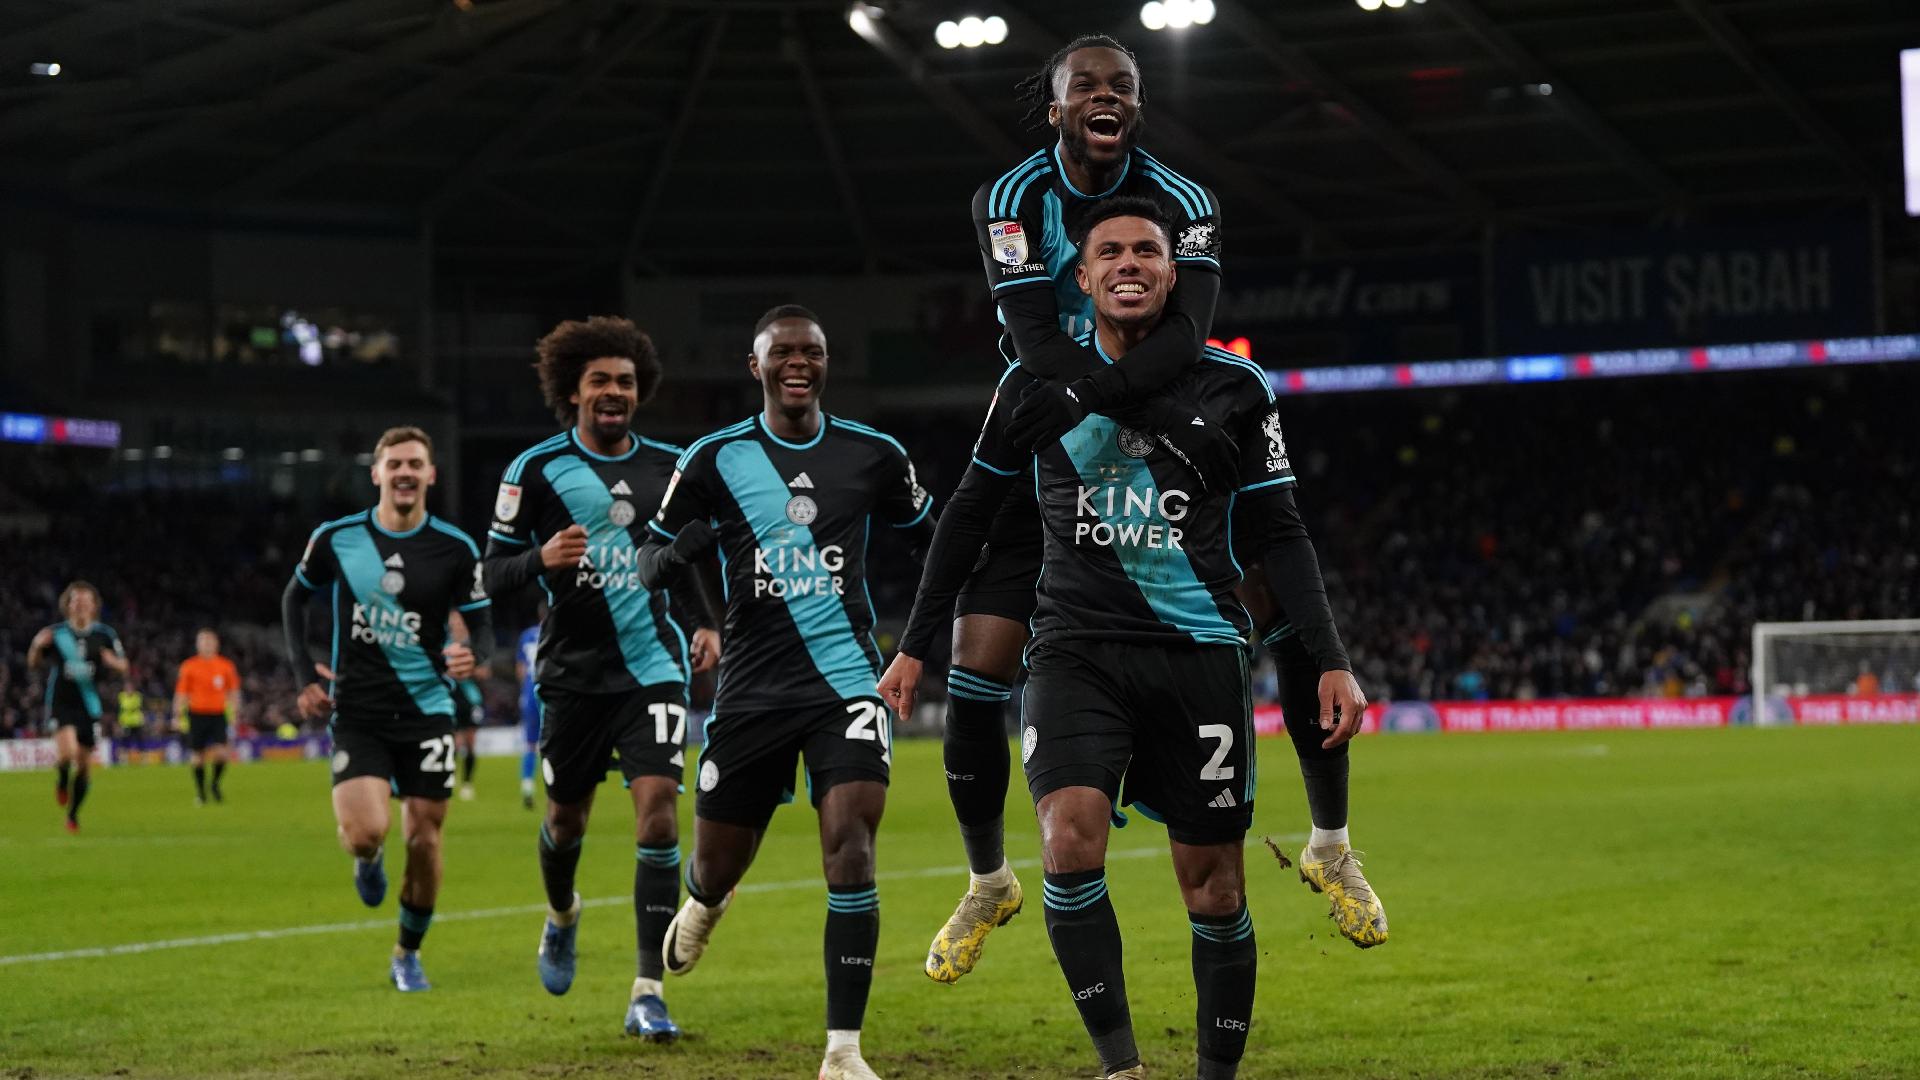 Championship leaders Leicester cruise to routine win at Cardiff